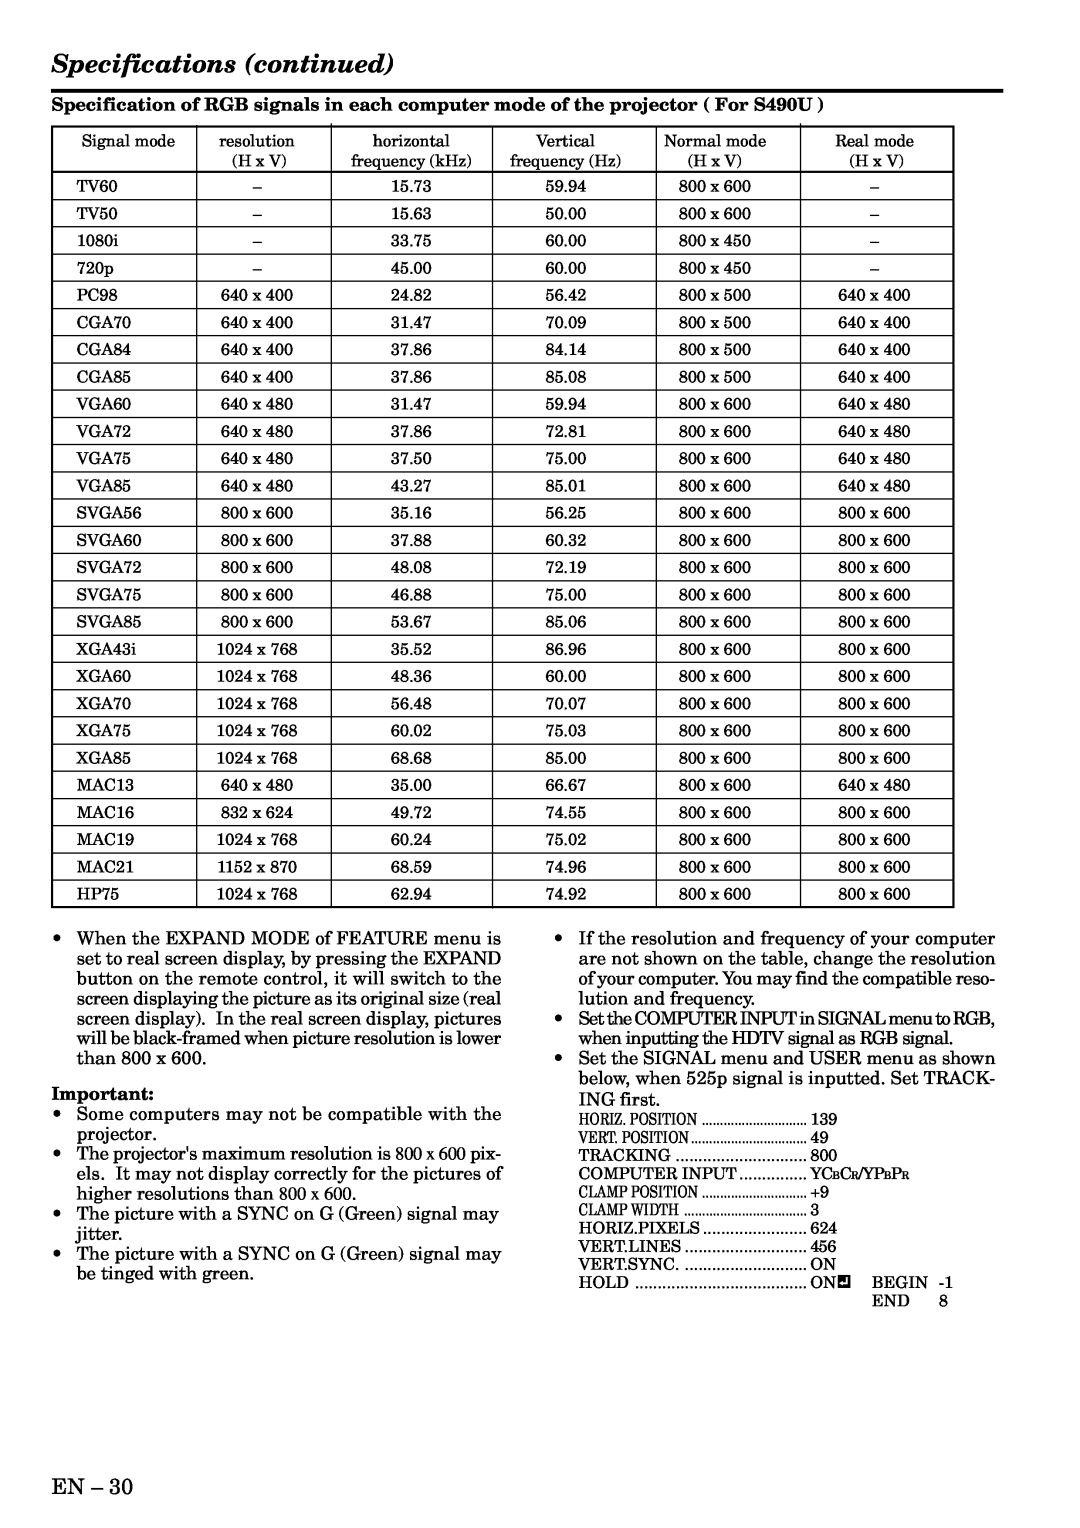 Mitsubishi Electronics X490, X500, S490 user manual Specifications continued 